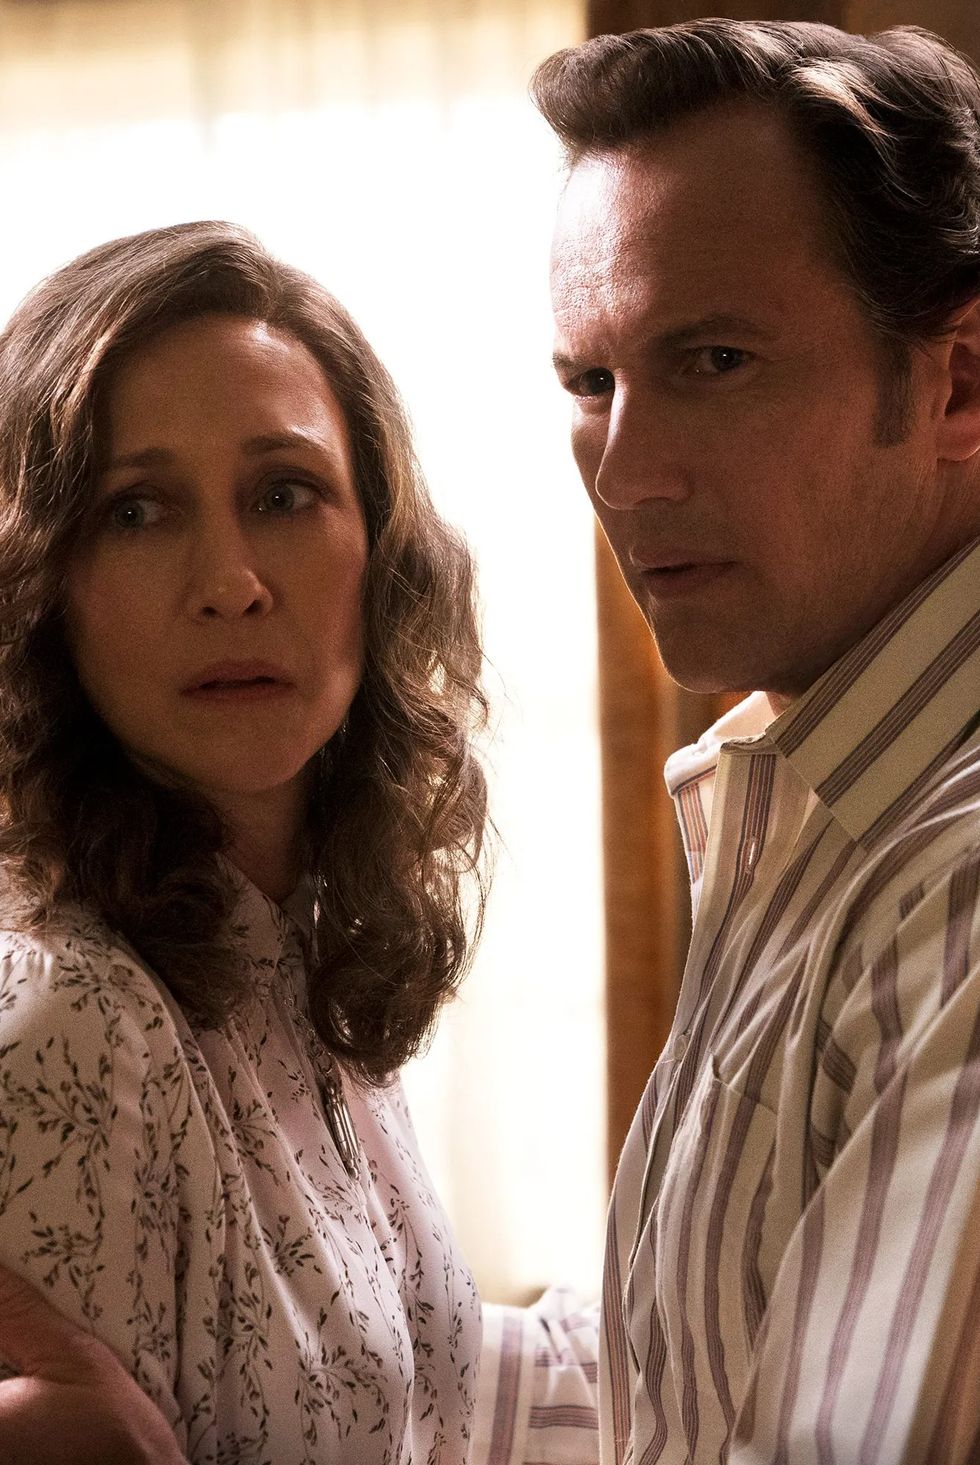 ed and lorraine warren look afraid in a scene from 'the conjuring'